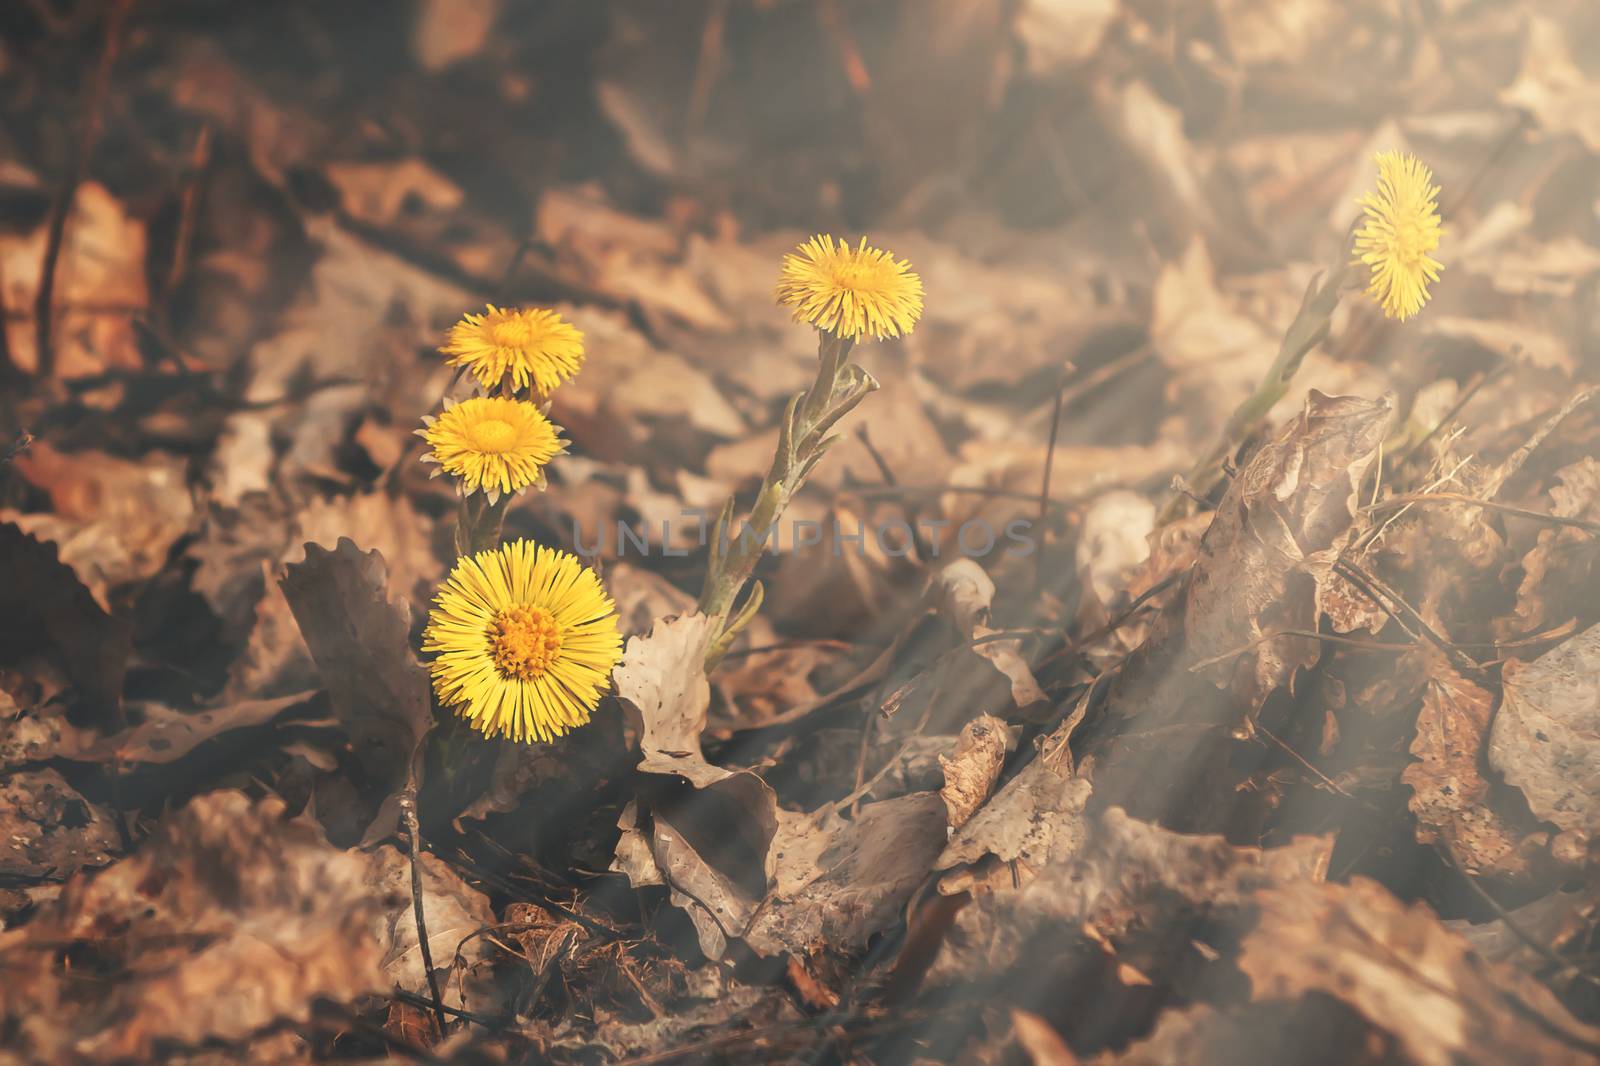 Early spring flowers of coltsfoot made their way through a bed of dry leaves.